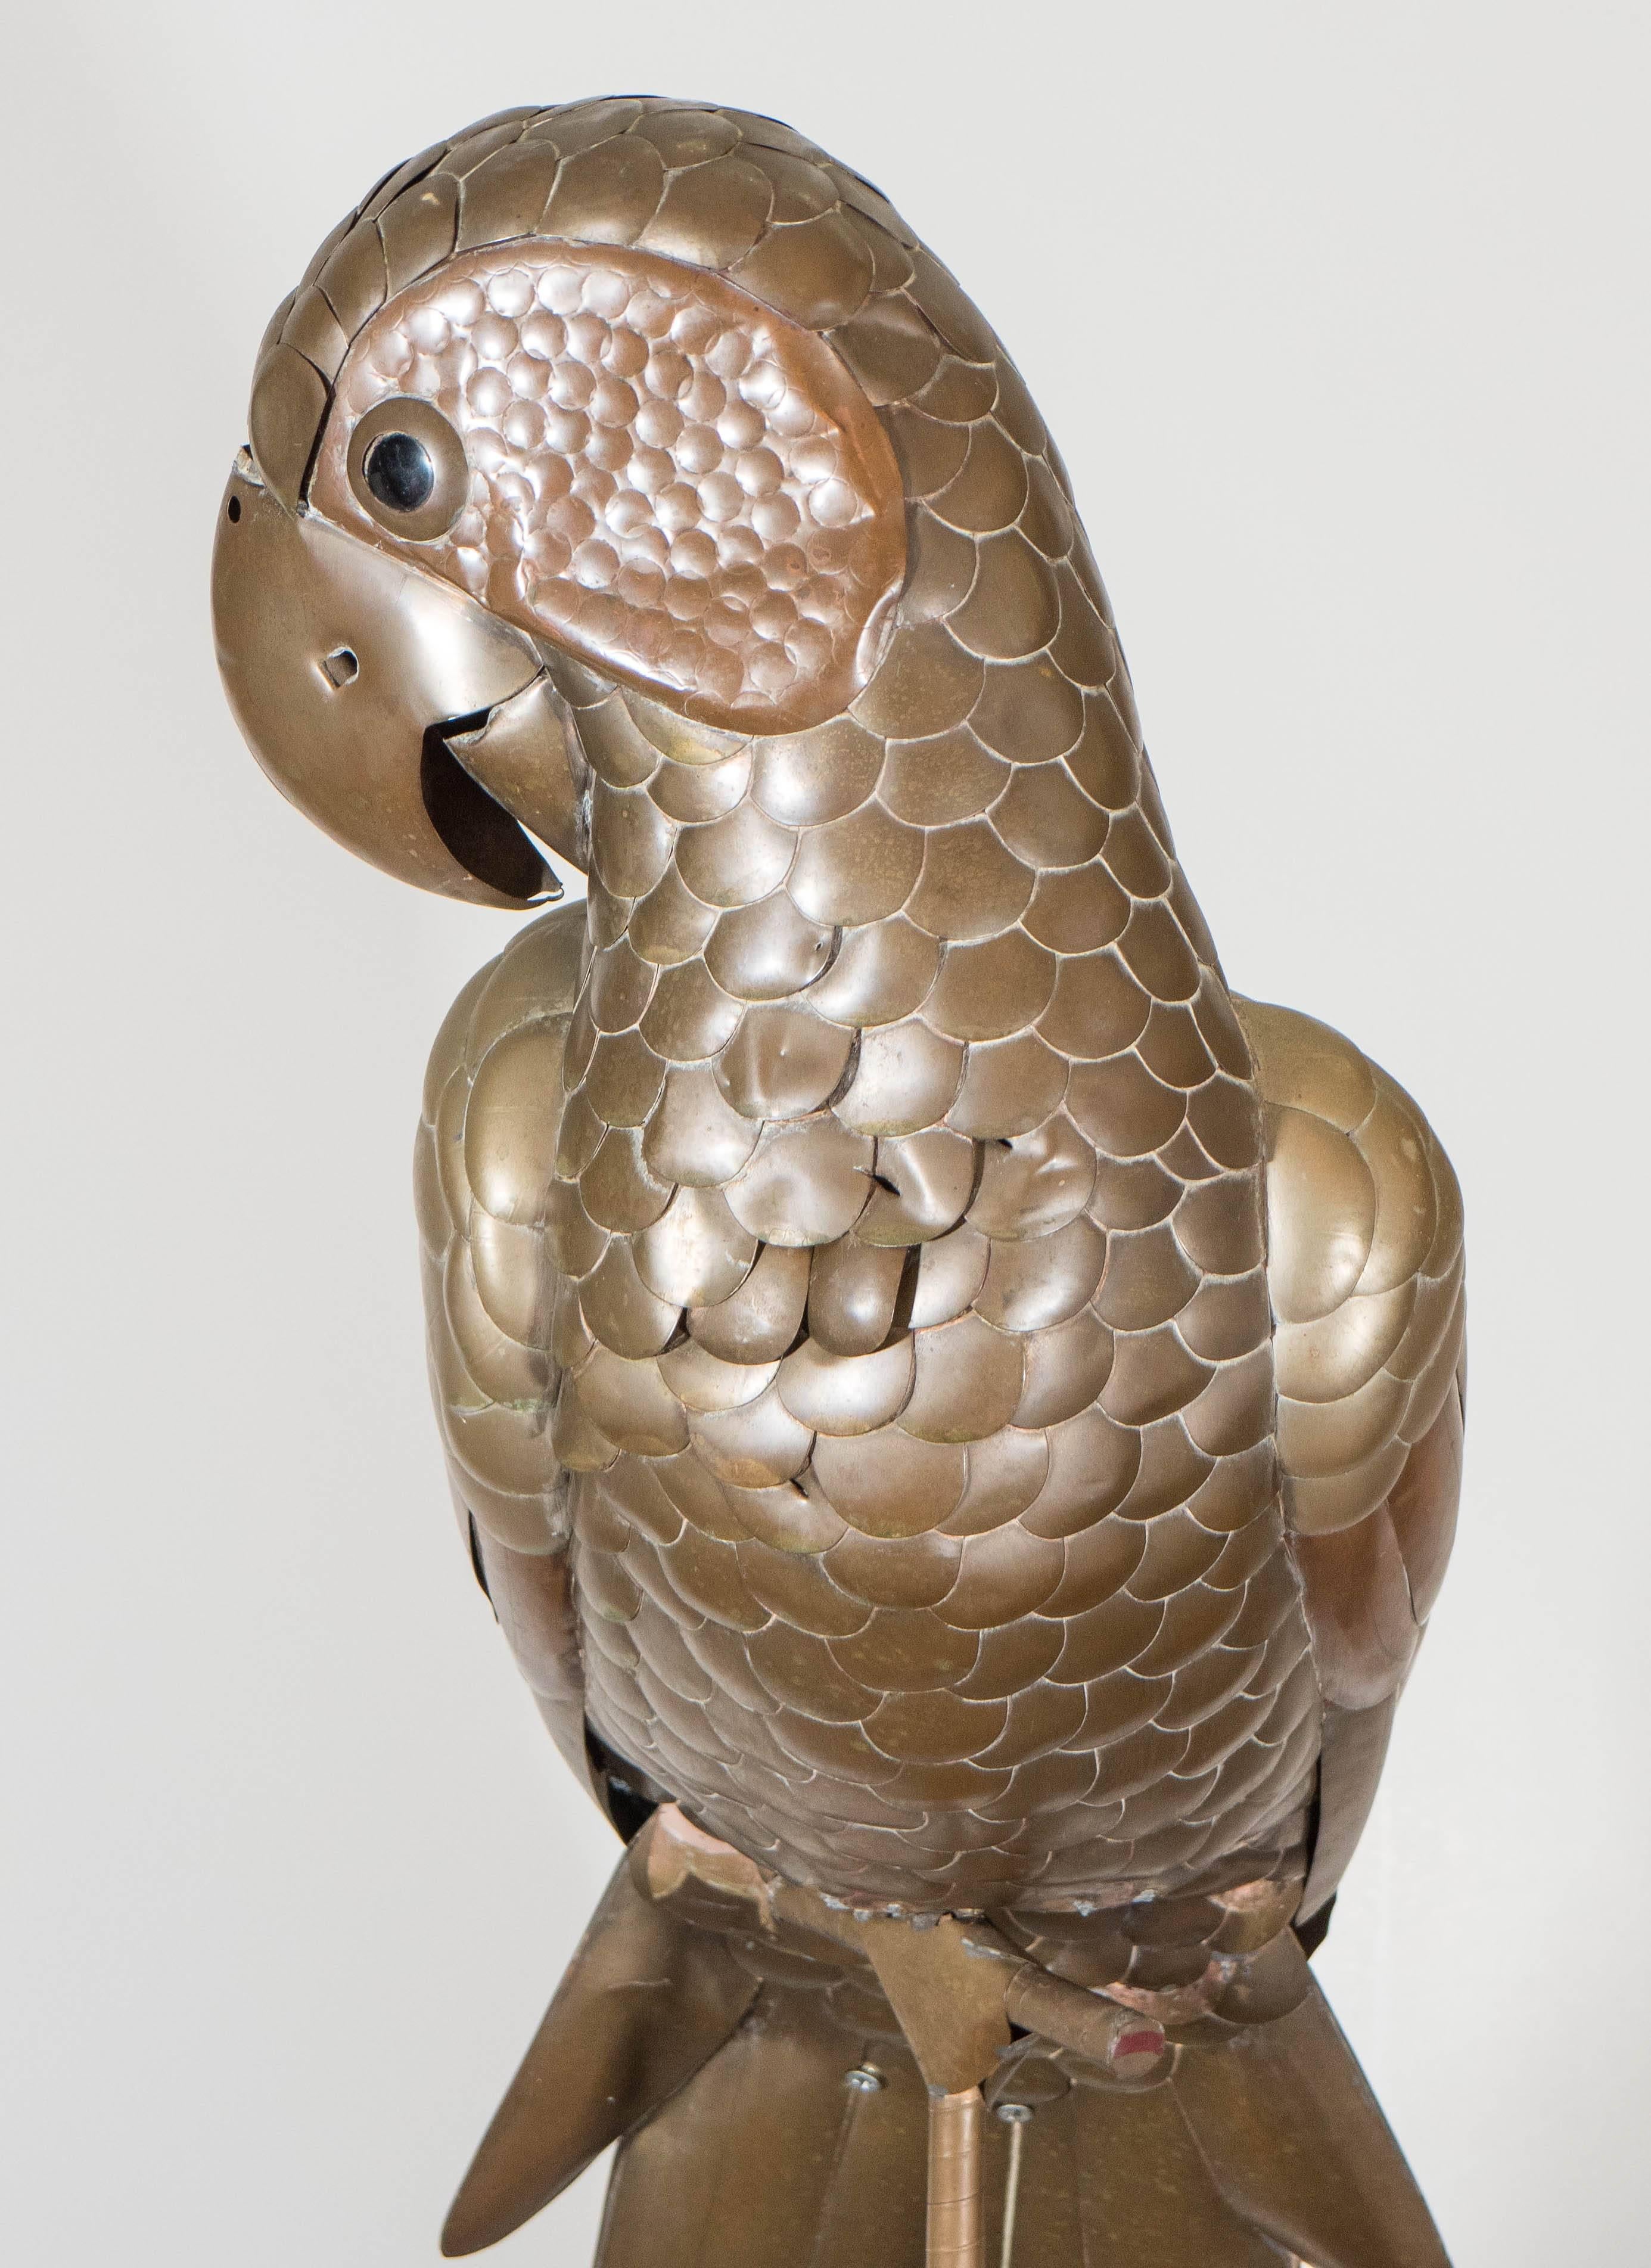 A vintage sculpture of a parrot, perched on a tripod stand, produced by Mexican artist Sergio Bustamante, in brass with copper accents. Good condition, any present wear consistent with age.